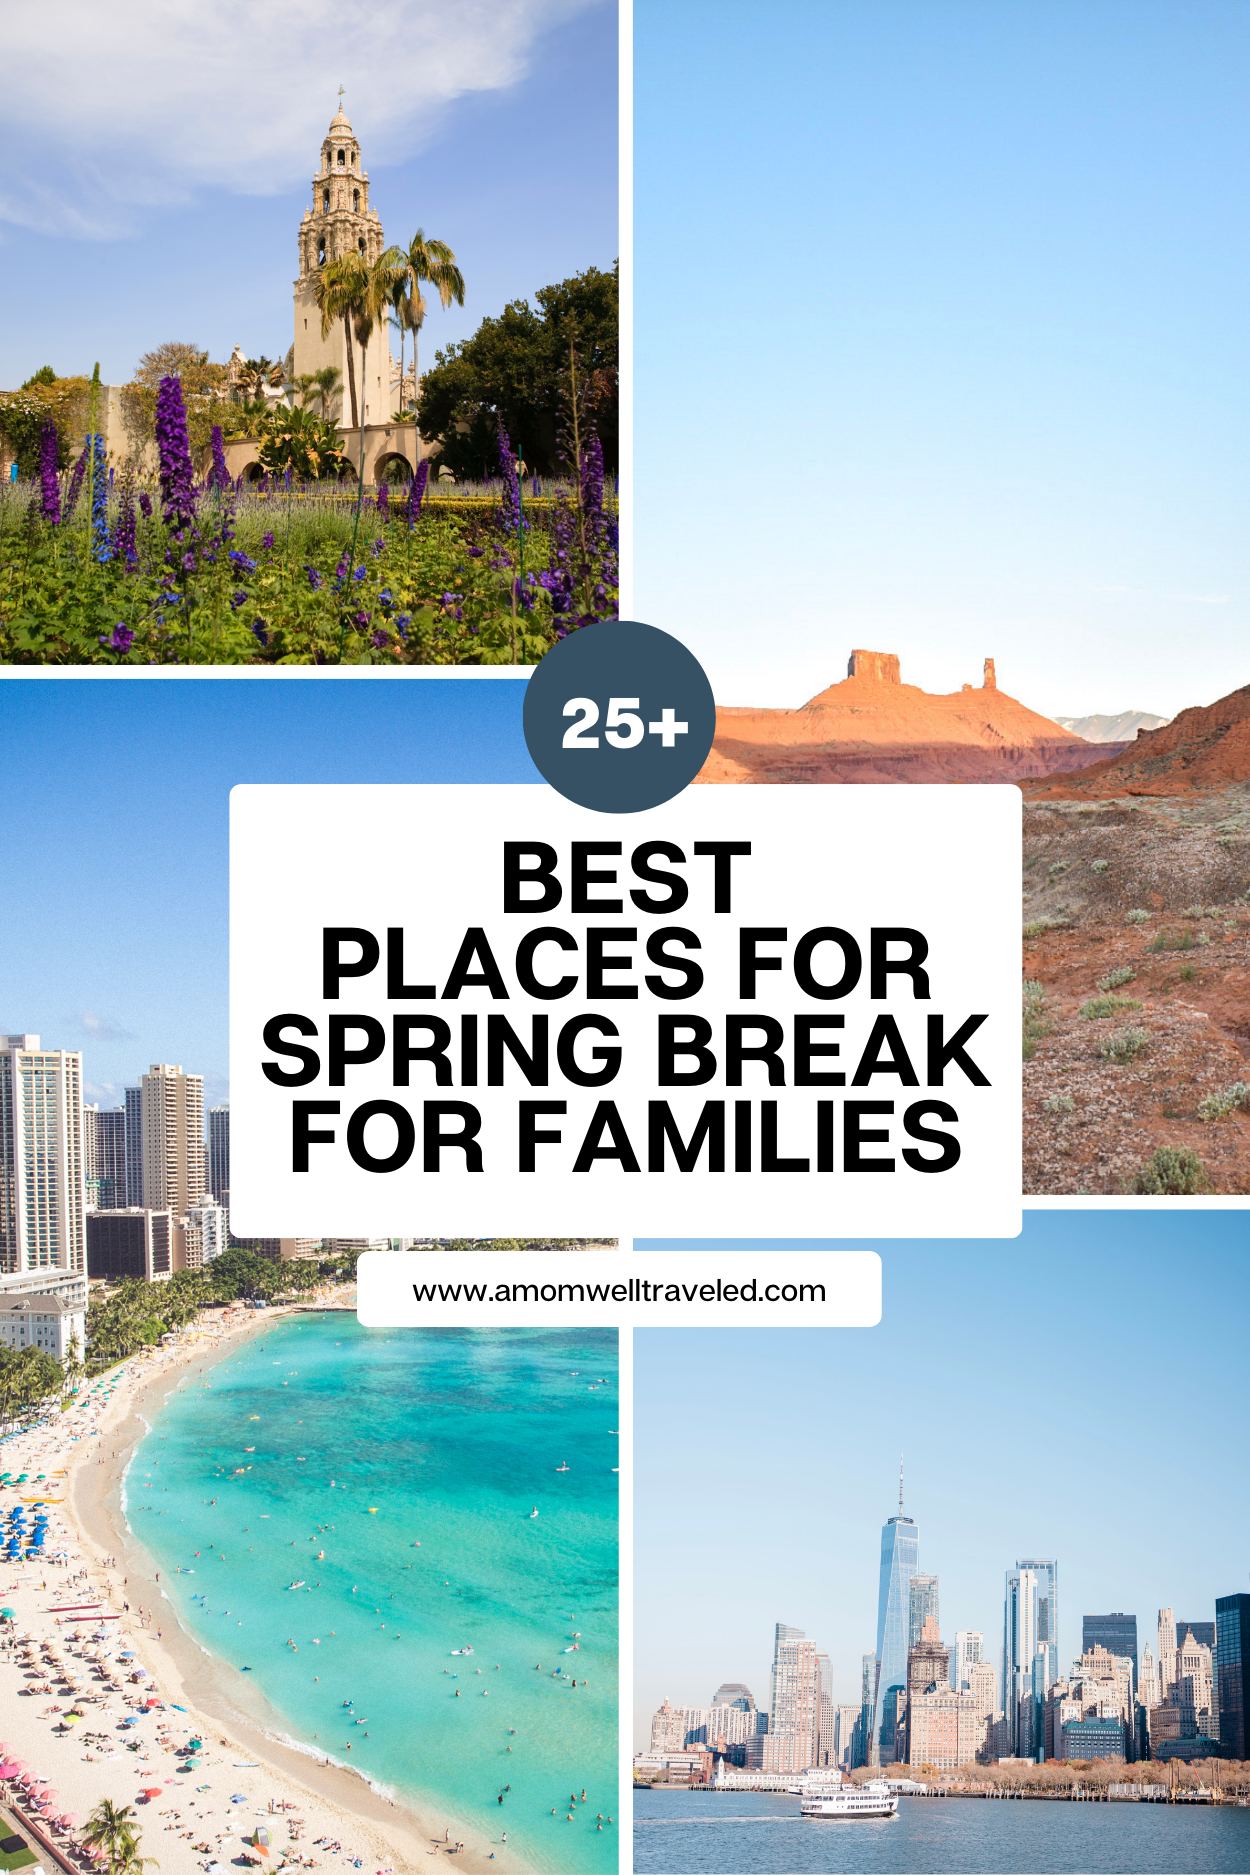 25+ Best places for spring break for families